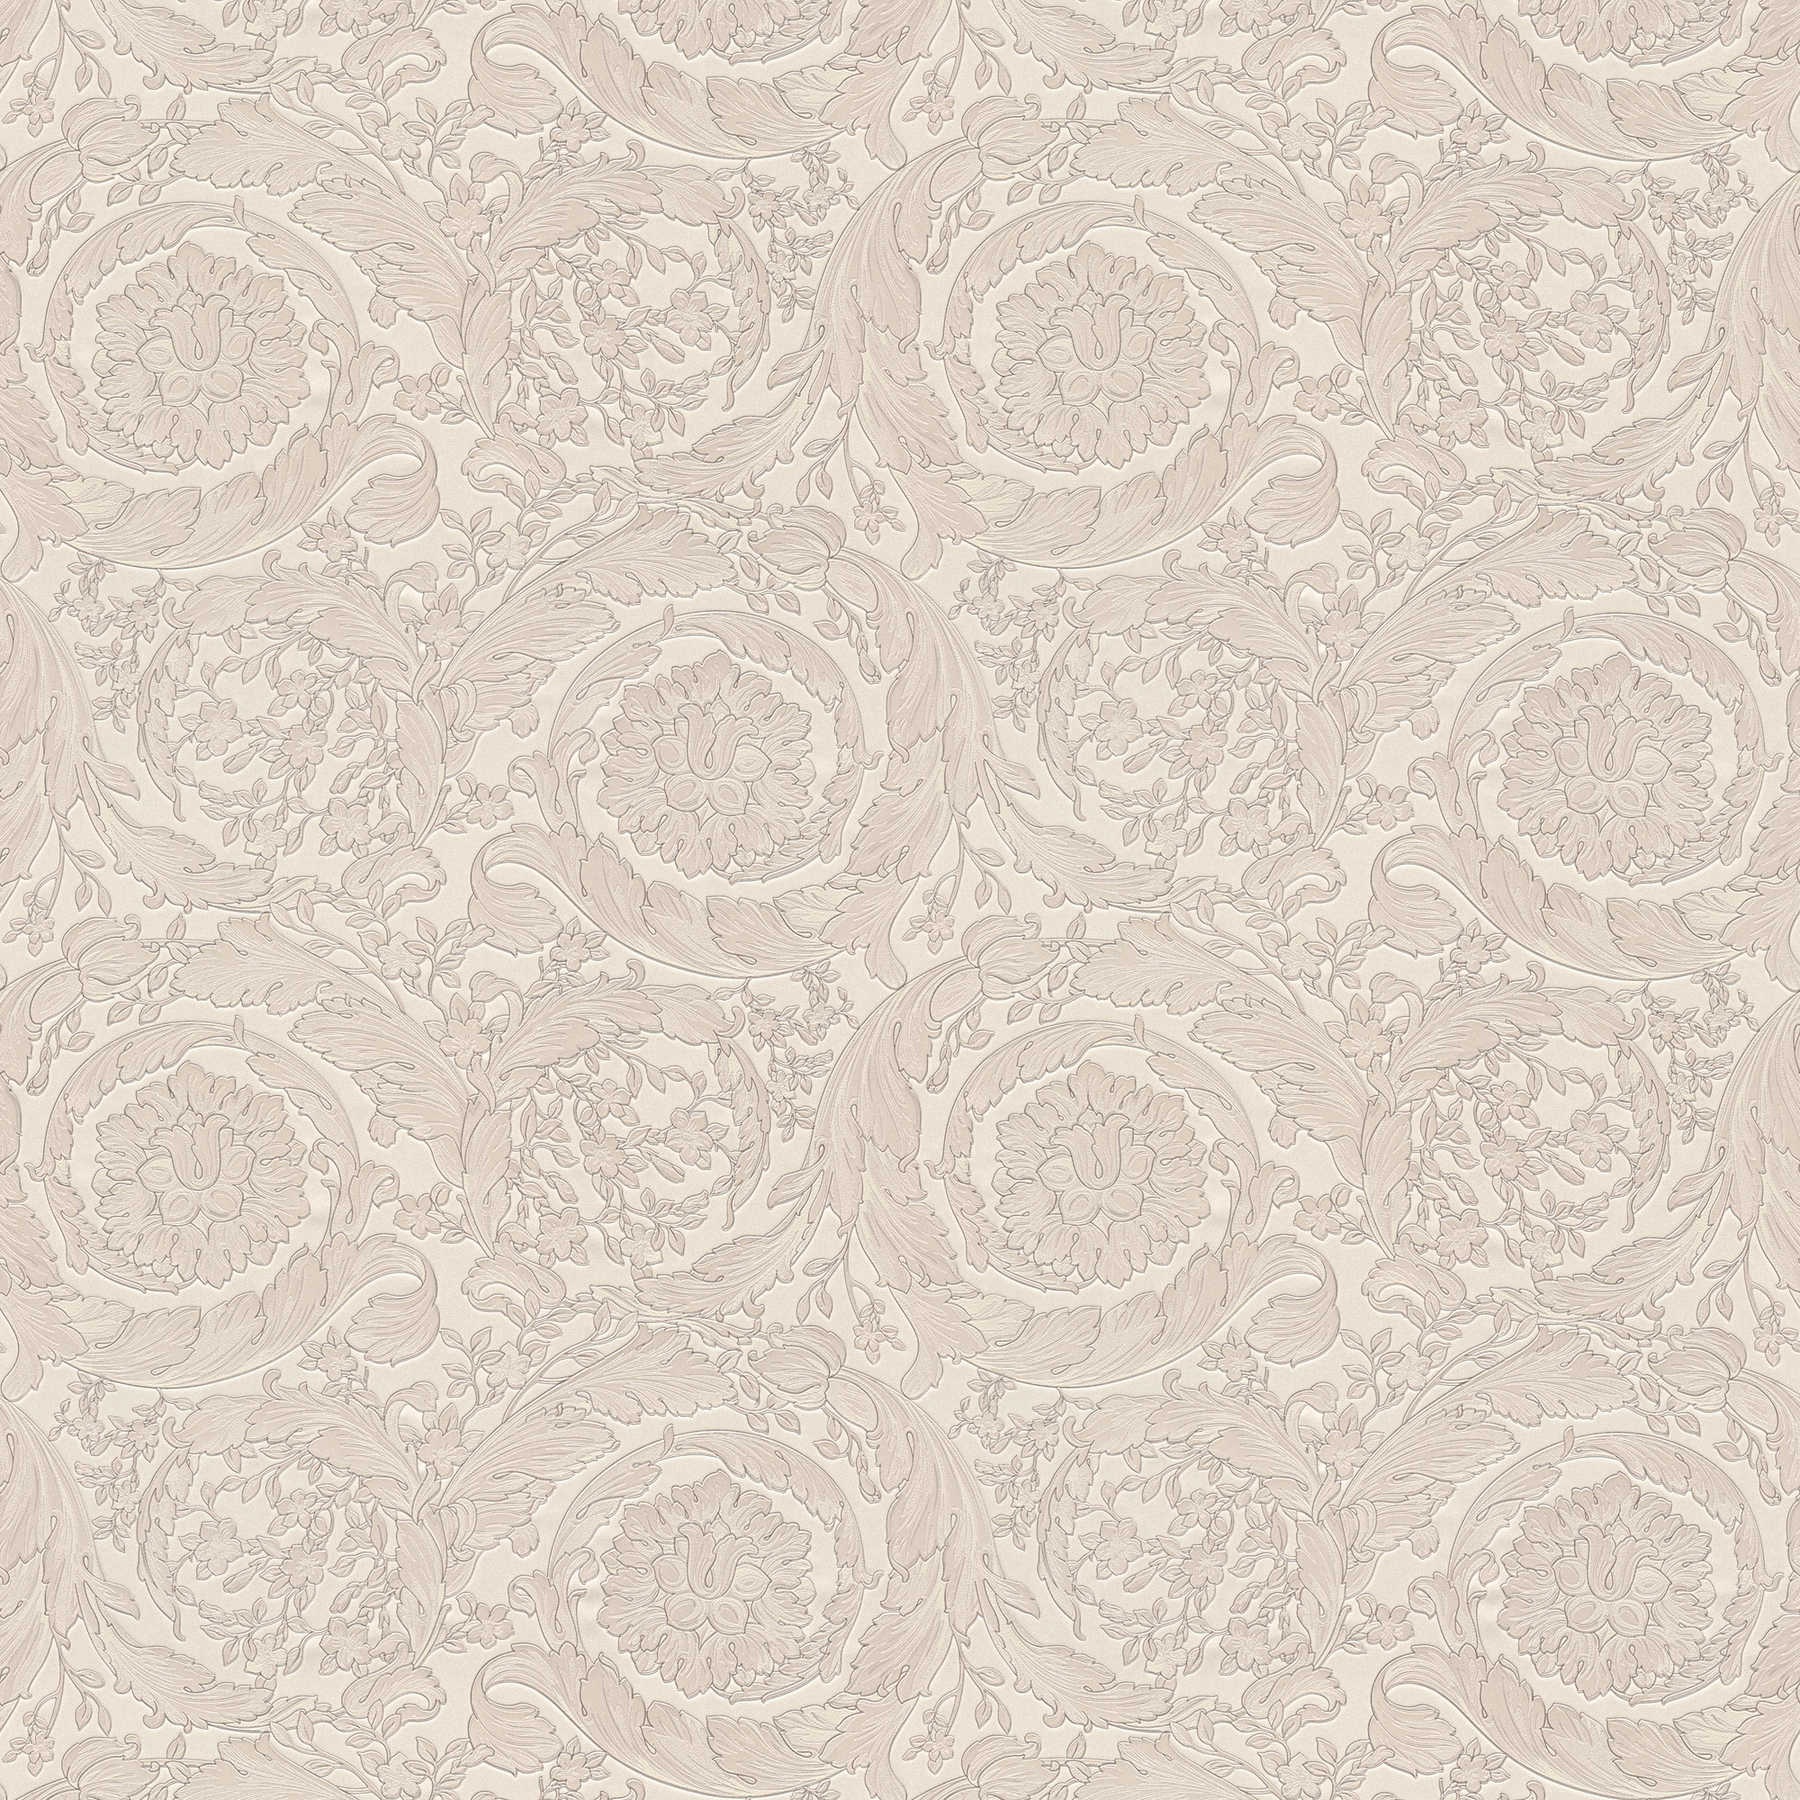             Wallpaper VERSACE floral ornament design with metallic luster - brown, cream
        